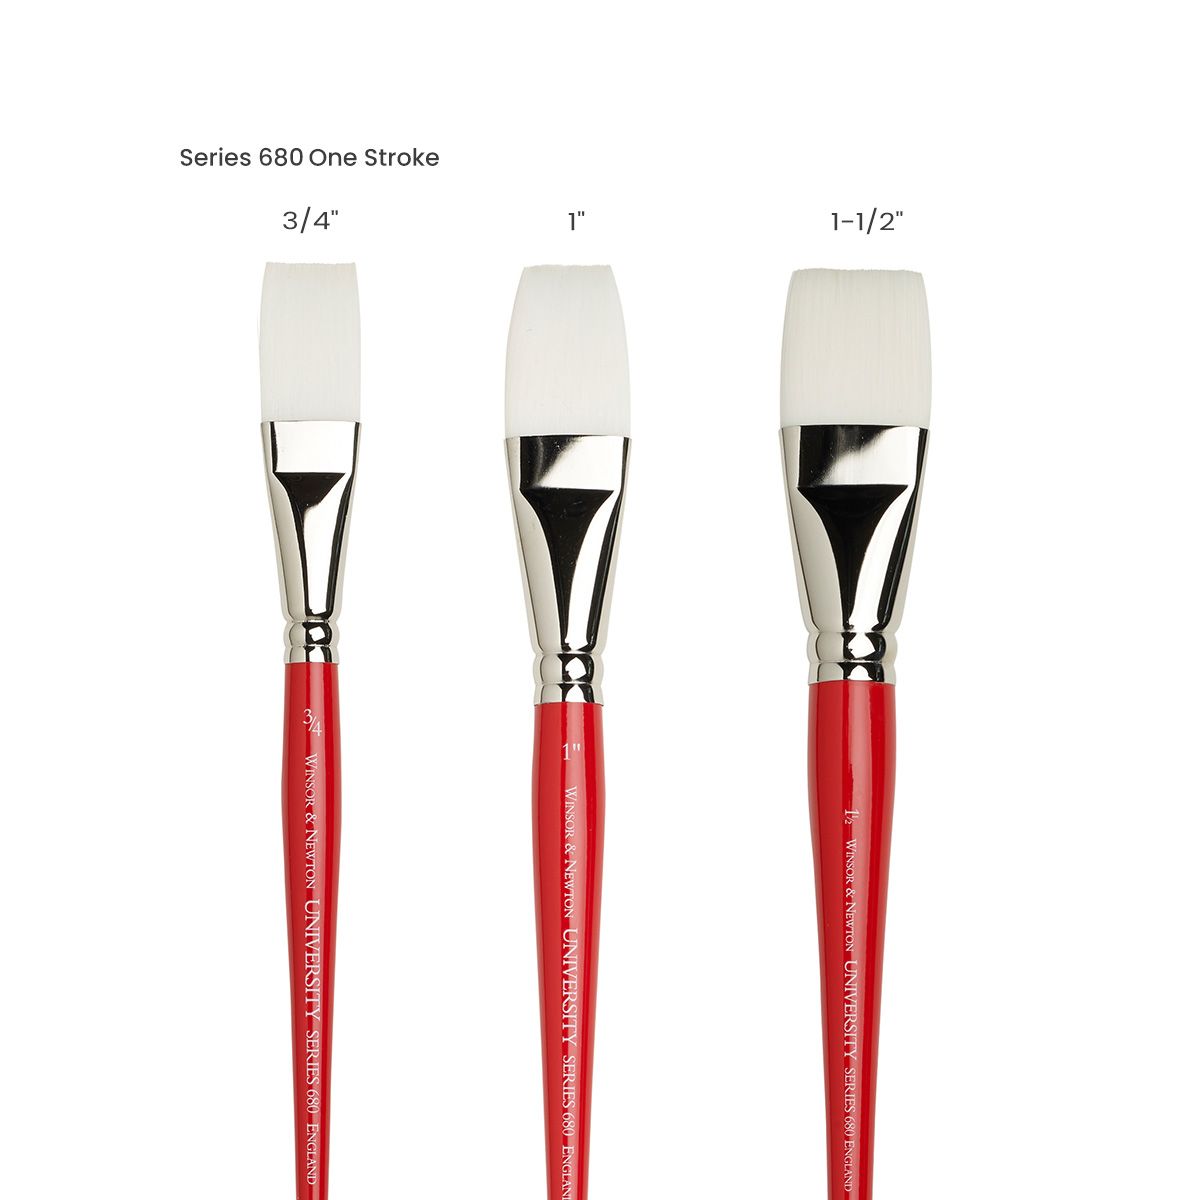 Series 680 One Stroke Brushes